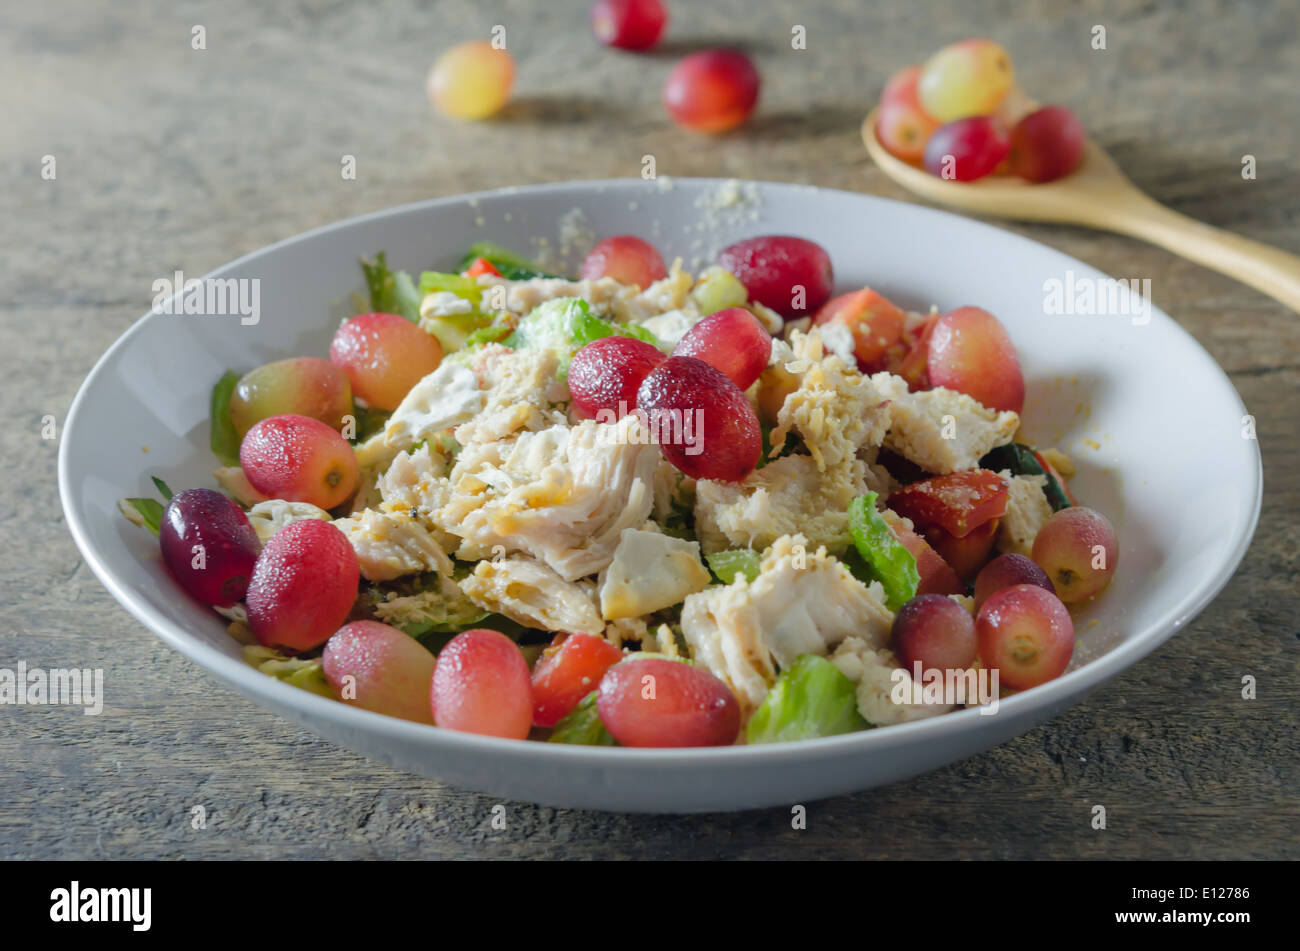 Mix salad with grapes and chicken on white dish Stock Photo